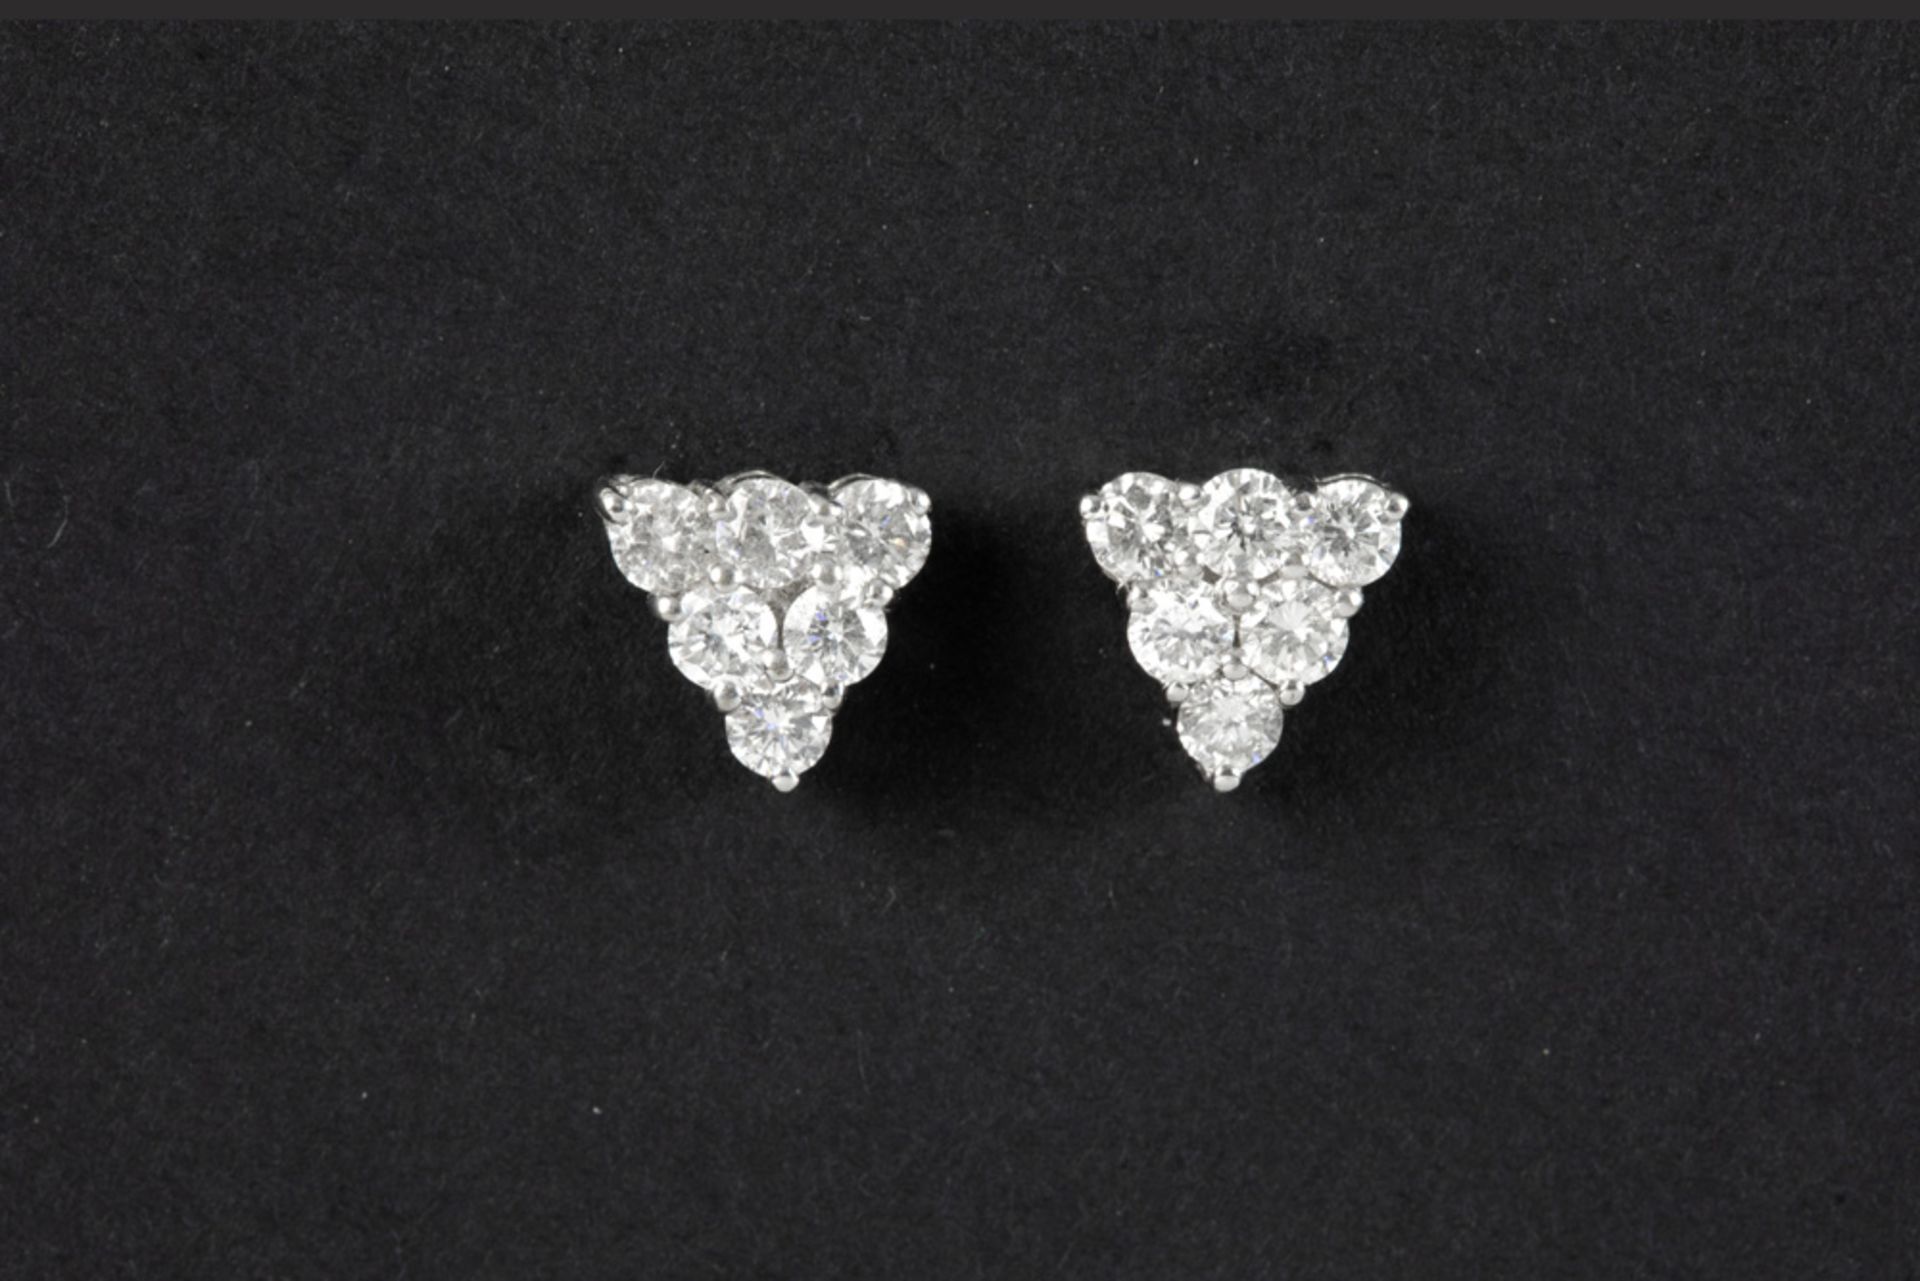 pair of earrings in white gold (18 carat) with at least 0,80 carat of high quality brilliant cut